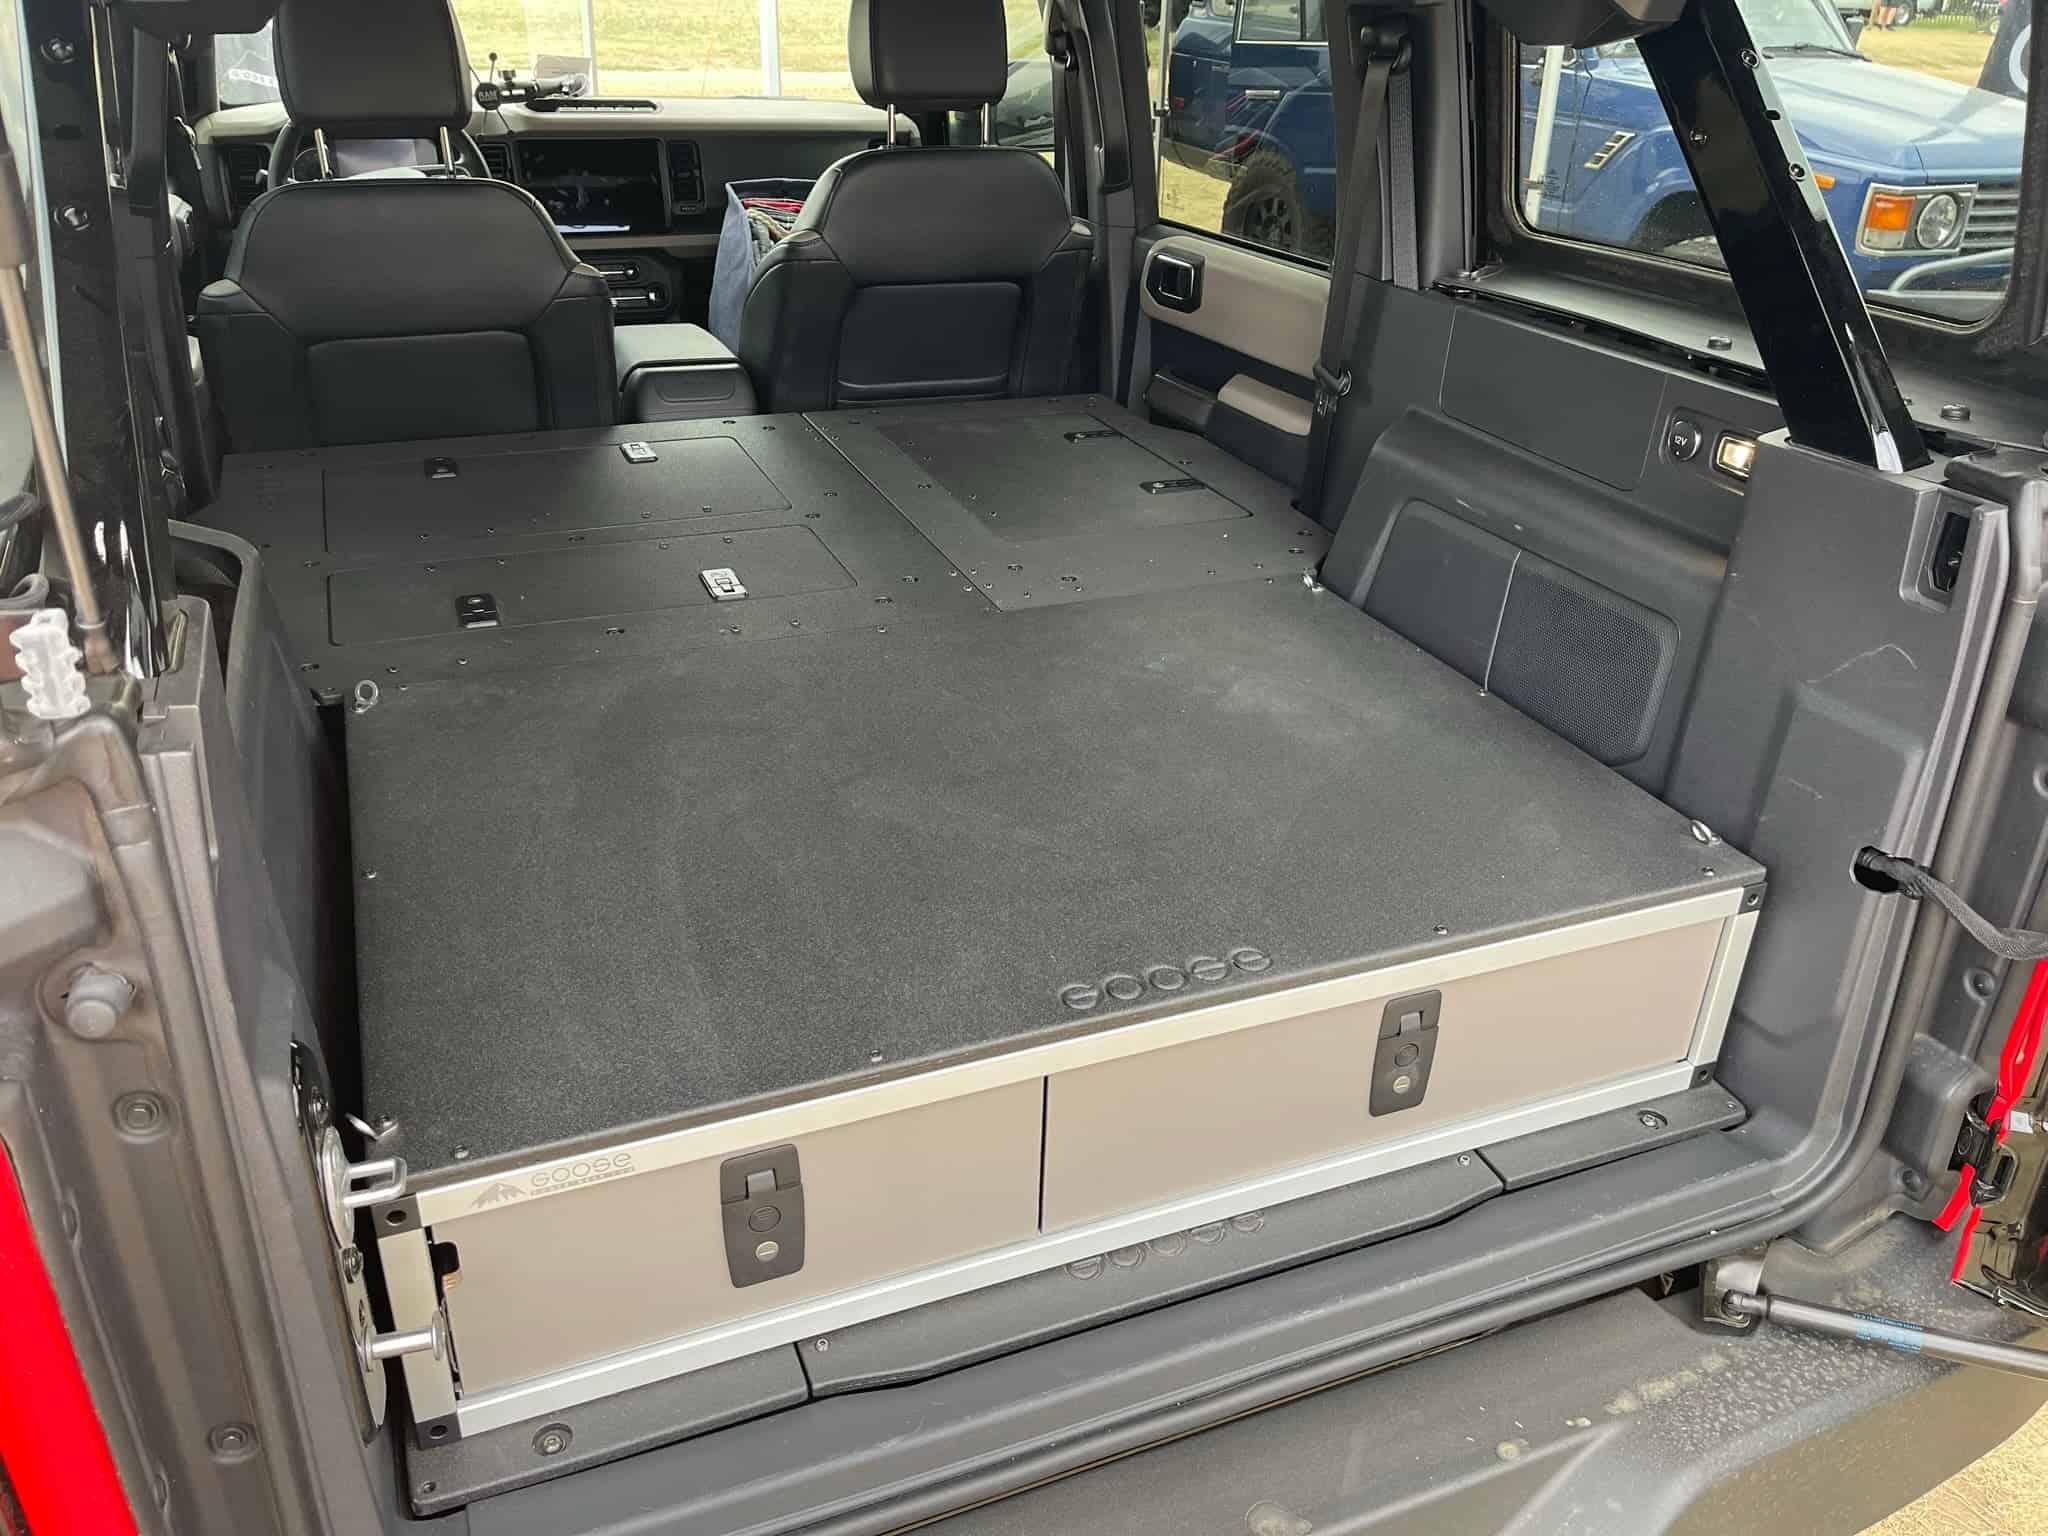 Stealth Sleep and Storage Package for Ford Bronco 2021-Present 6th Gen. 4 Door